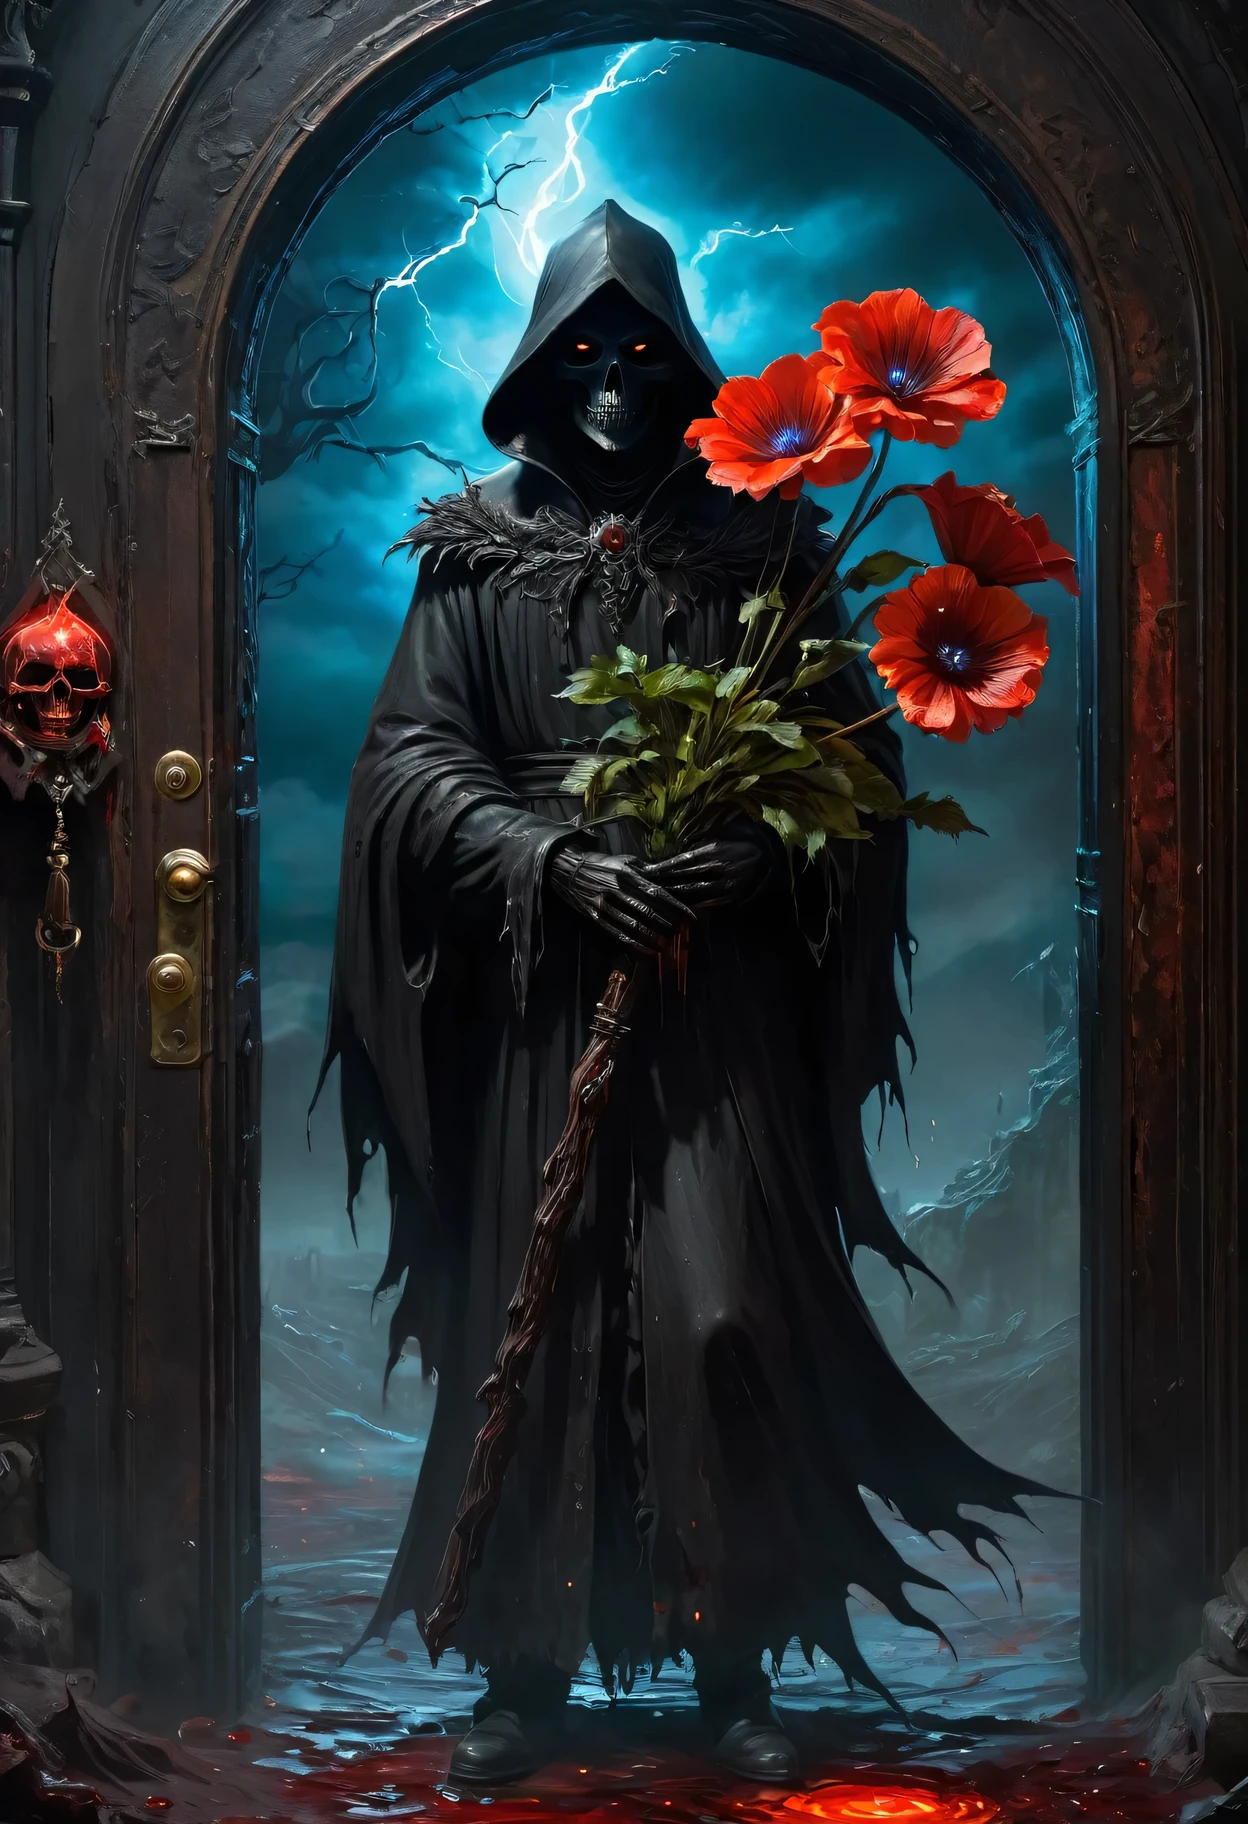 A painting of a Black Grim Reaper standing in front of，Door of hell，Blooming bloody ghost flower，soul，Charm，frivolous，mystery，Heavy Metal Style，Metal Art，The flowers made of iron have a metallic luster，Metal texture in the post-industrial era，Crystal Pendant，Jadeite Inlay，Carefully crafted，Perfect craftsmanship，Blue lightning ，Dark fantasy art，Dark fantasy concept art，Bloodborne concept art，Dark Concept Art，Dark Digital Concept Art，Dark fantasy art style，CG Society，Red Blood Art，Realistic Dark Concept Art，Concept Movies，Art in dark fantasy style，Fantasy illustration